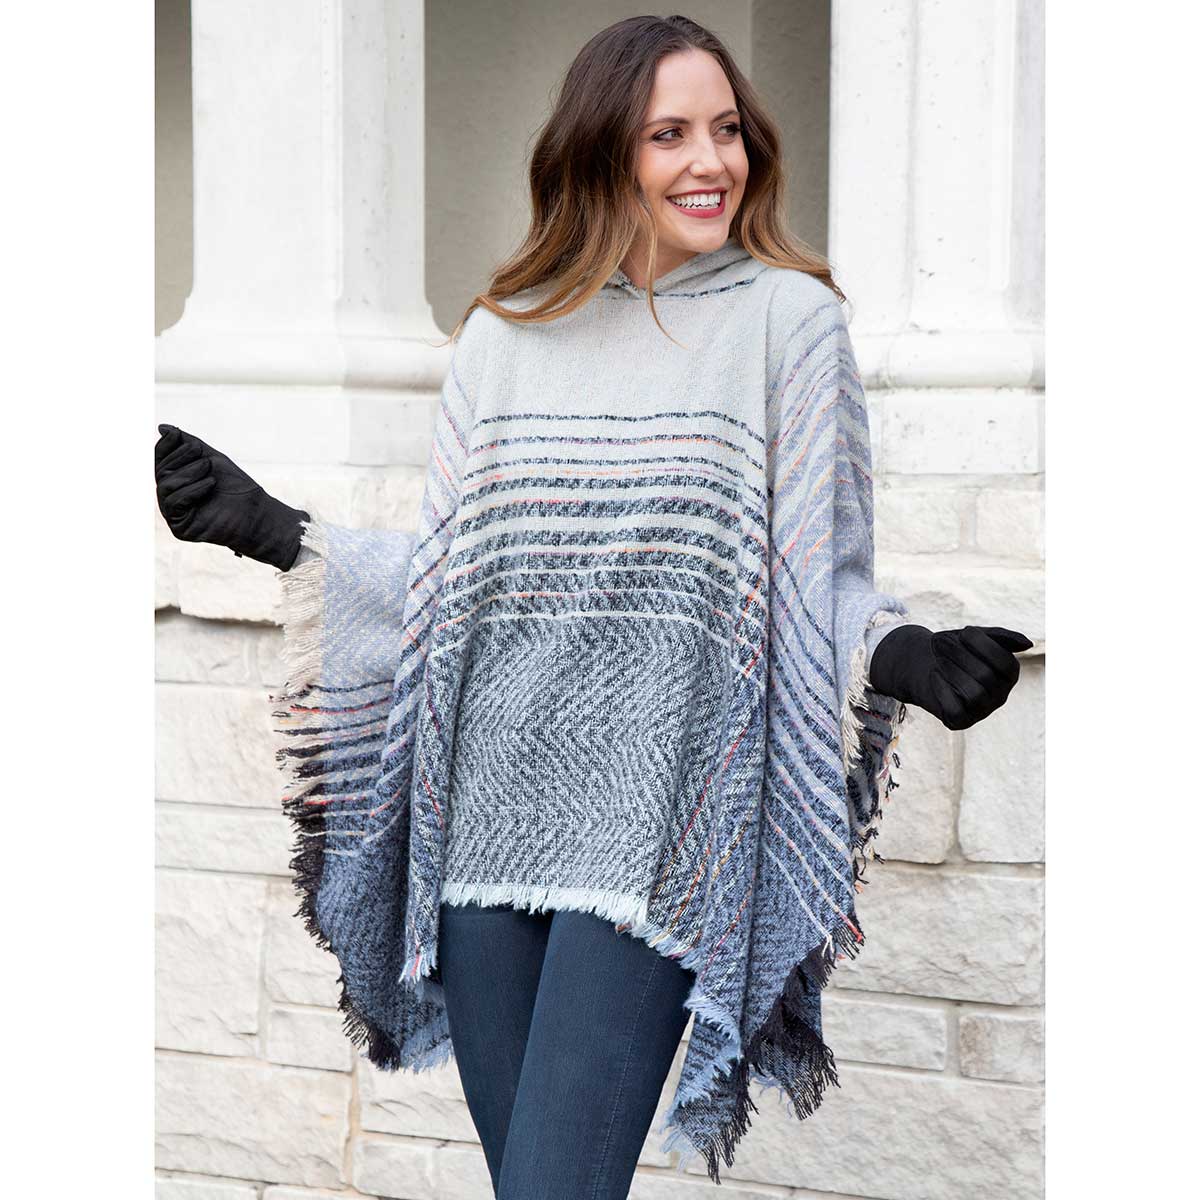 Blue and Cream Knit Poncho with Hood 53"x27"